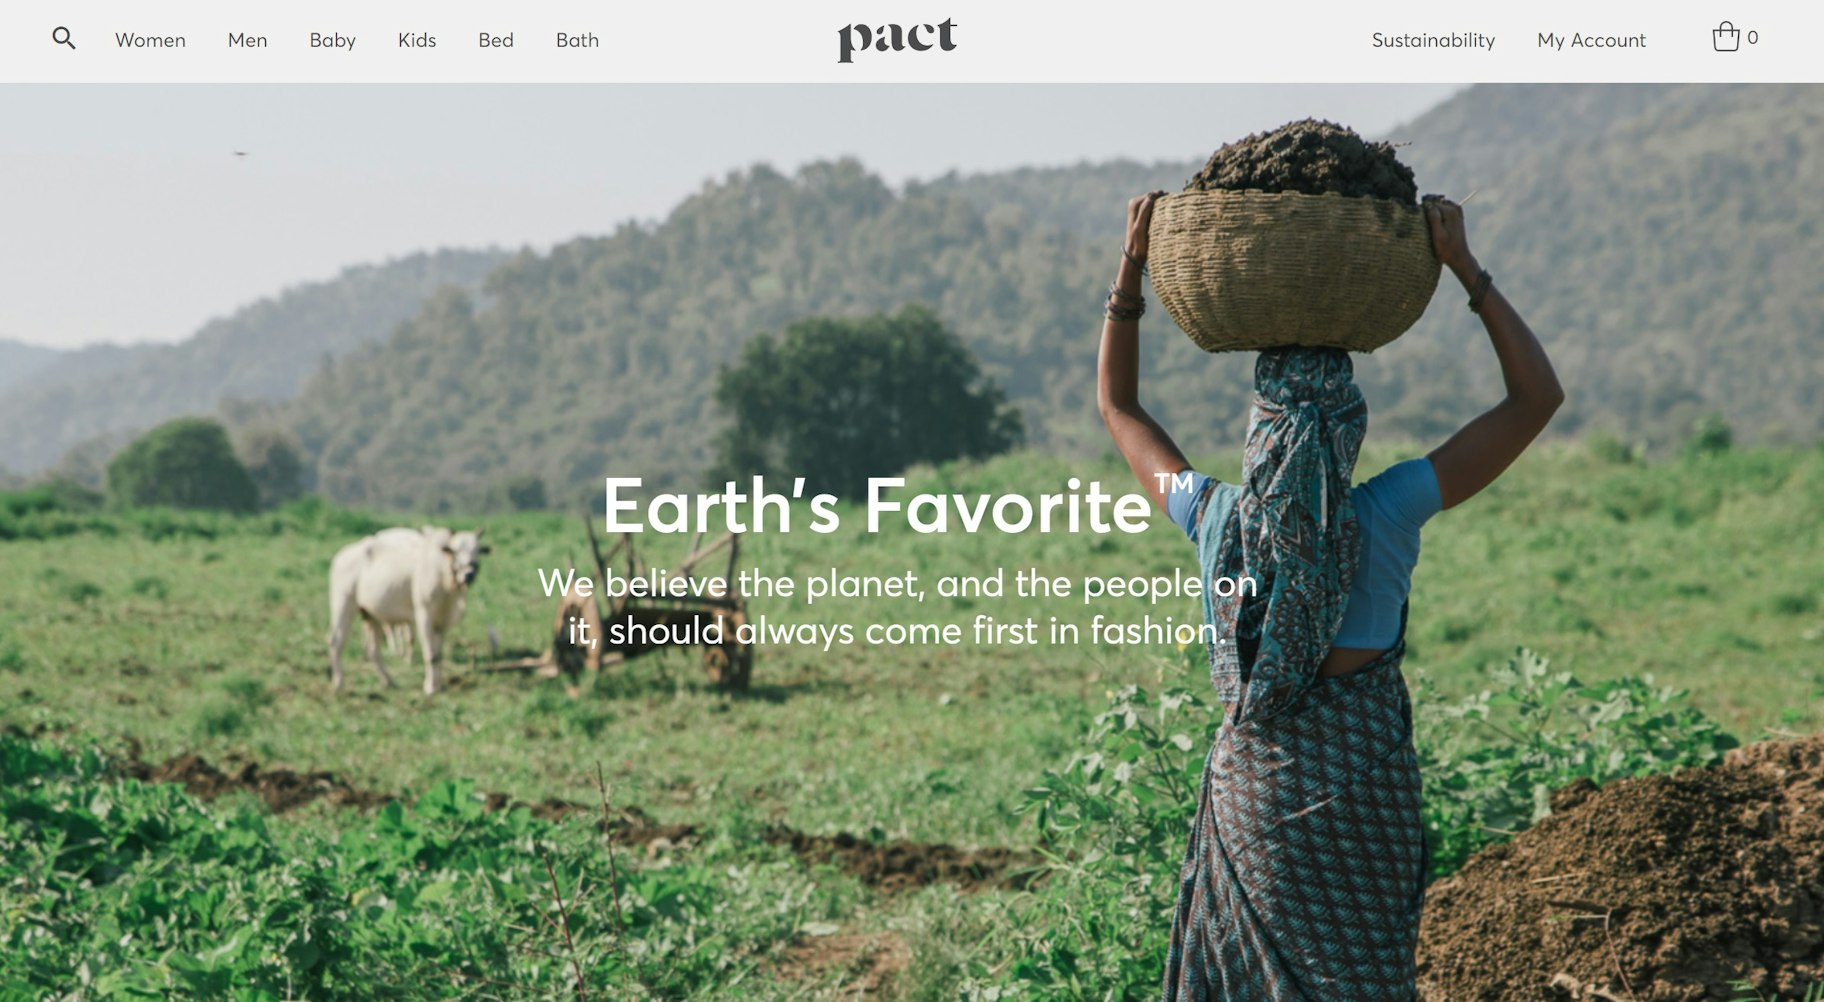 Pact eco friendly products